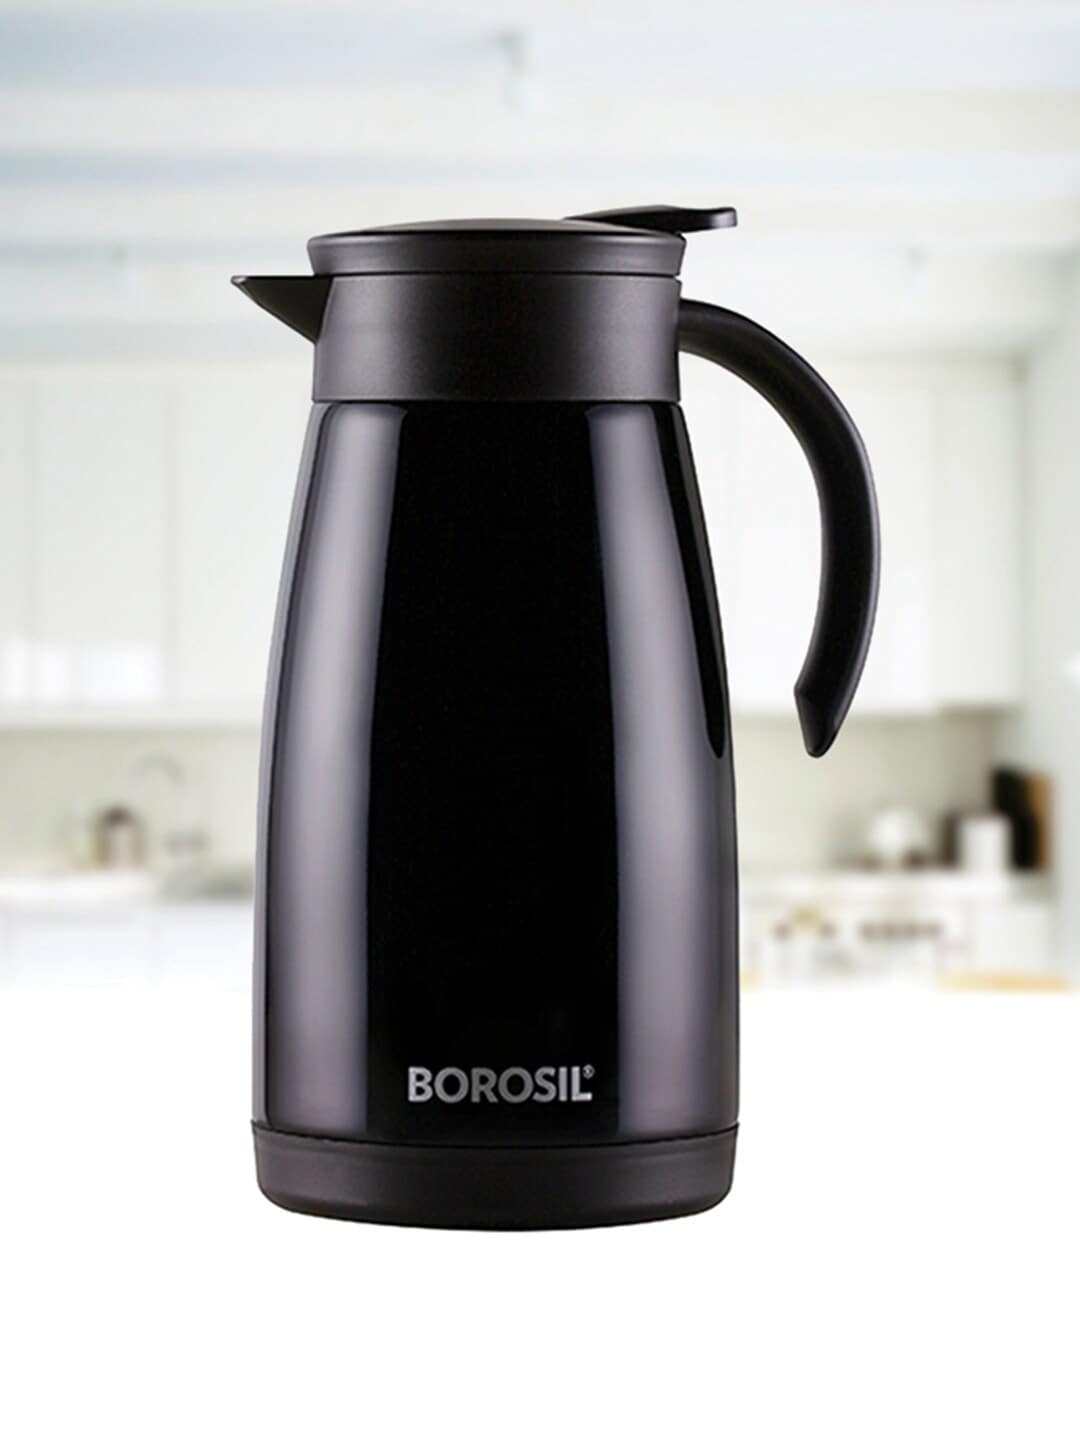 BOROSIL Black Stainless Steel Glossy Teapot Flask Price in India